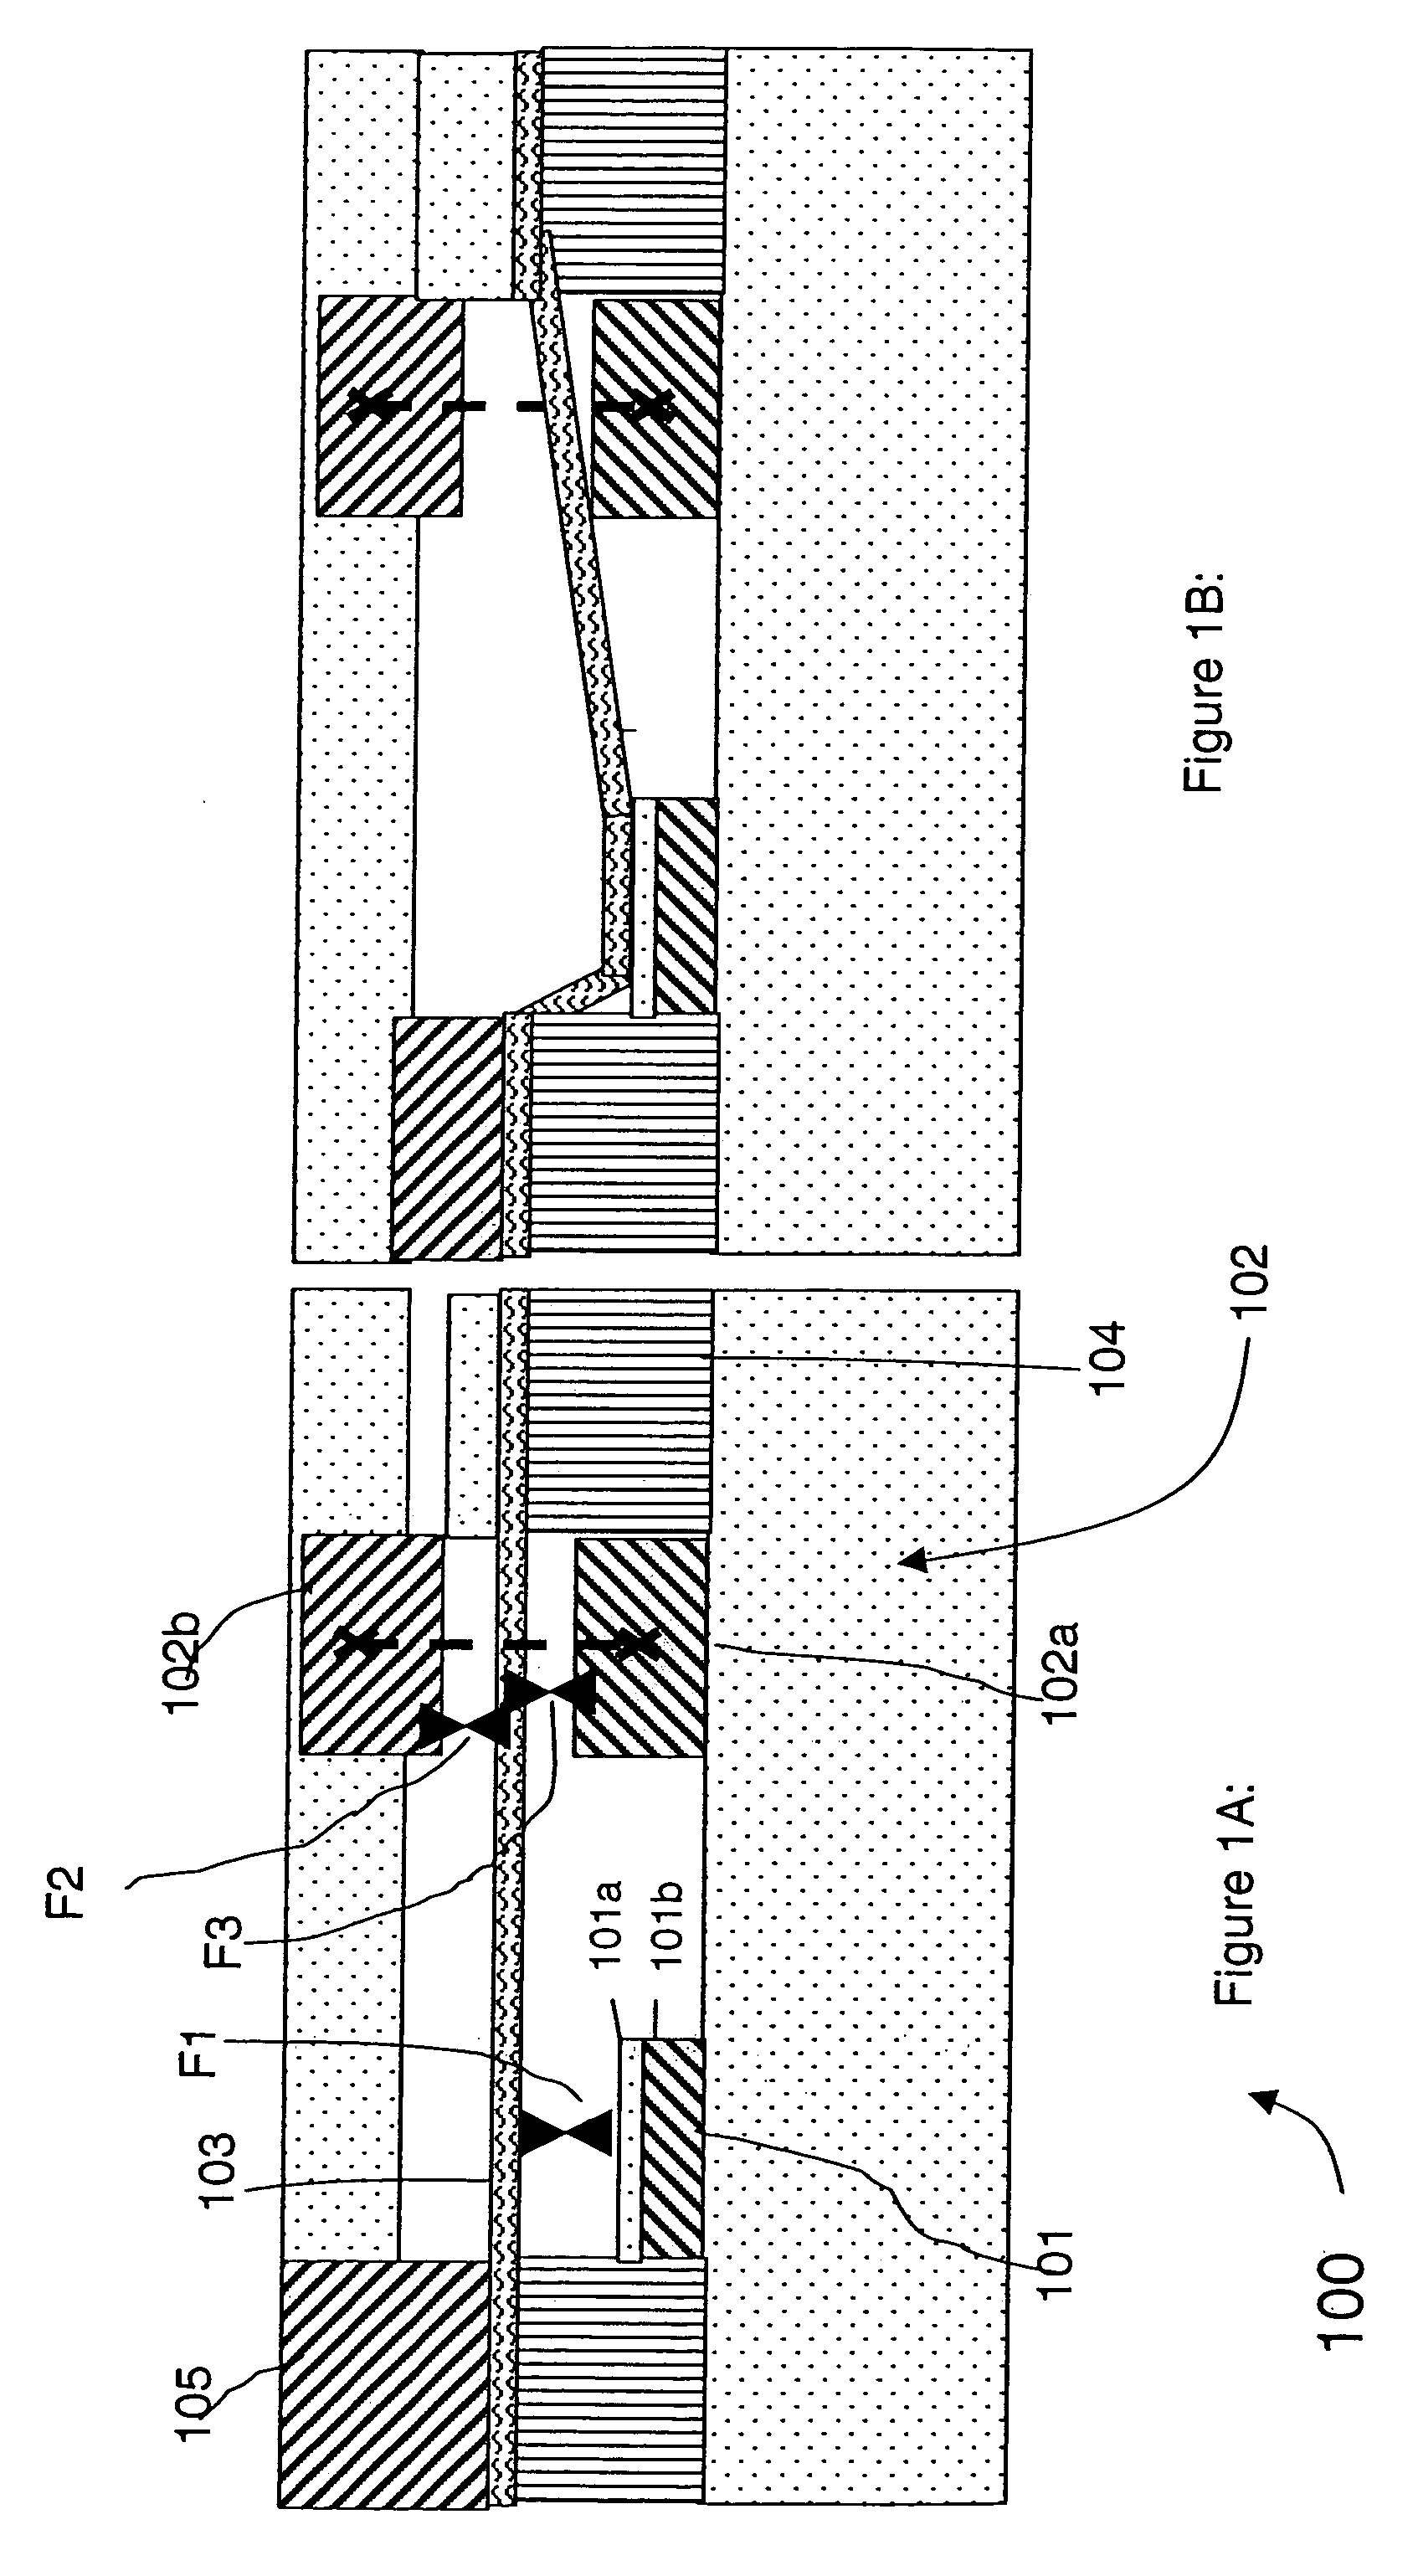 Isolation structure for deflectable nanotube elements